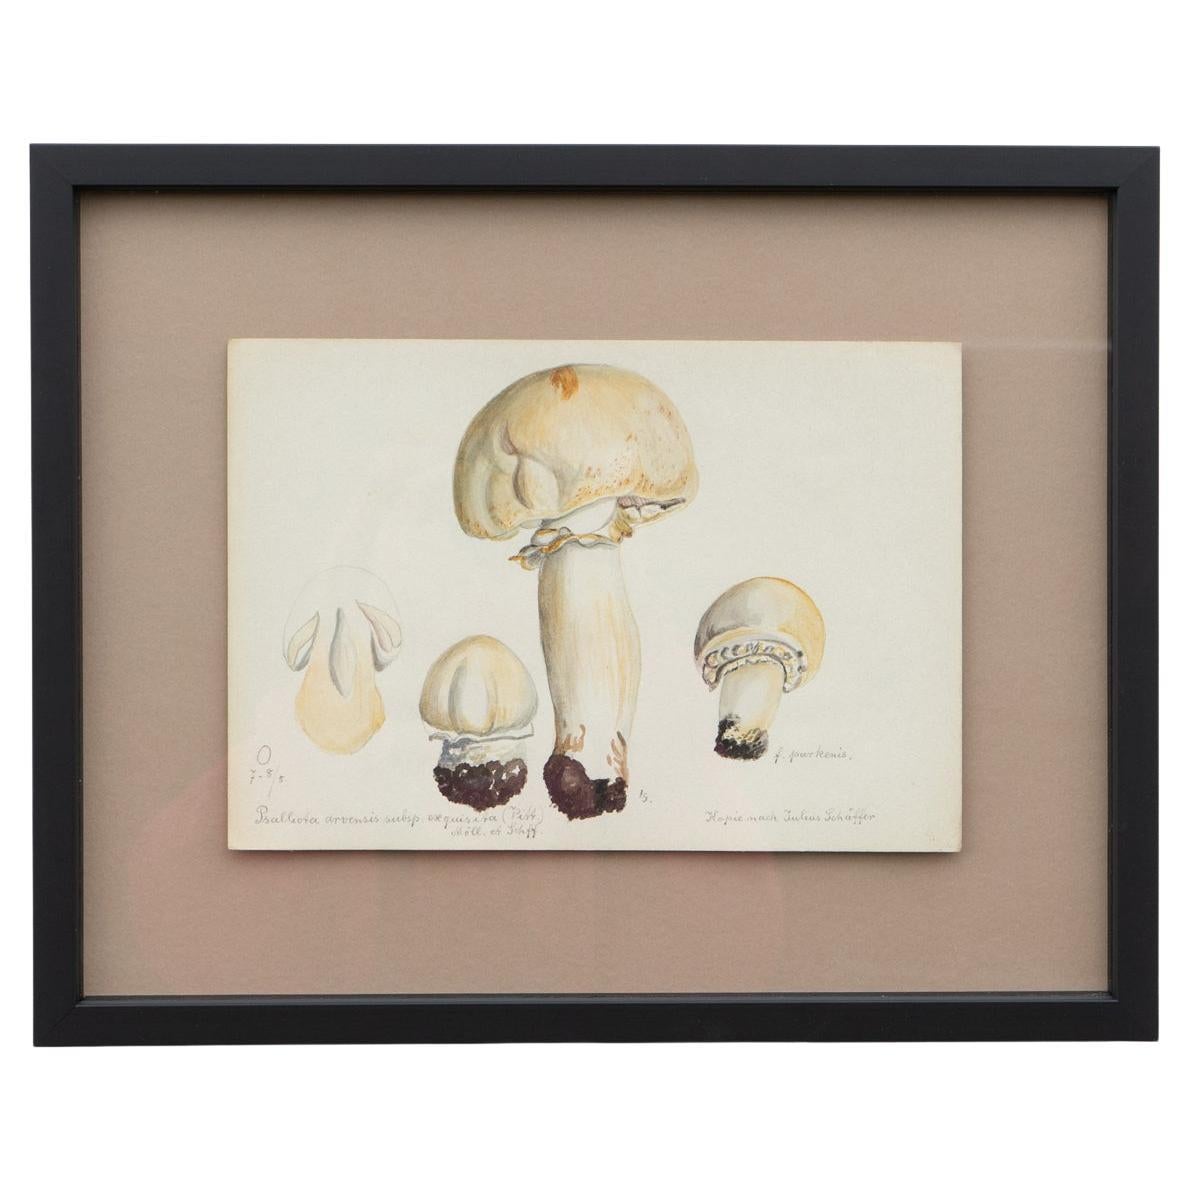 VINTAGE ORIGINAL WATERCOLOUR ON PAPER DEPICTION OF A HORSE MUSHROOM, (PSALLIOTA ARVENSIS OR AGARICUS AVENSIS)
Schäffer 1882-1944 was a German mycologist, his contributions include studies on the Agaricales (gilled mushrooms). Later, he revised the